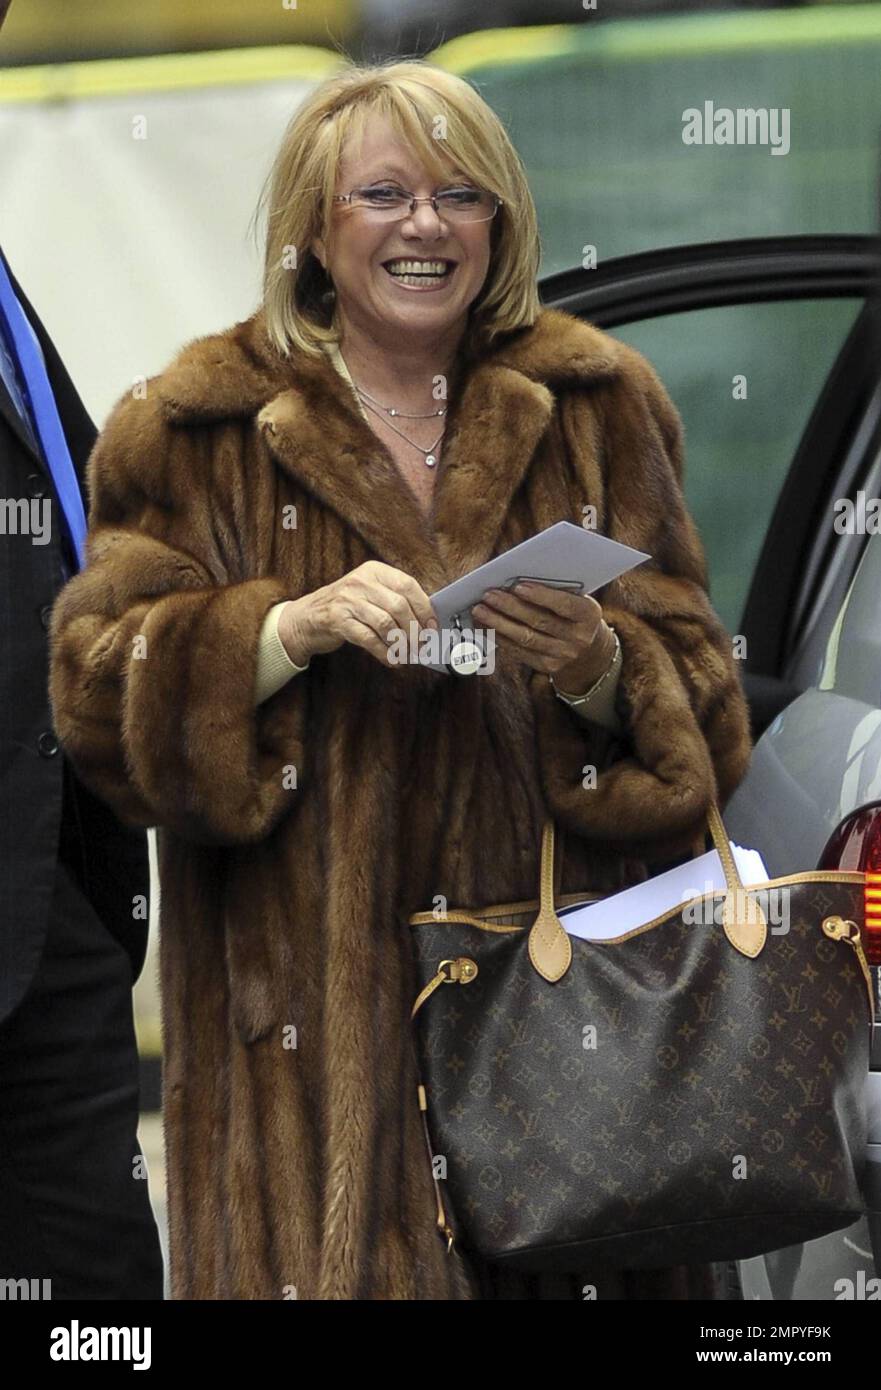 Singer and DJ Elaine Page looks striking in a full-length fur coat and  carrying a classic Louis Vuitton handbag as she arrives at BBC Radio 2.  London, UK. 1/28/11 Stock Photo - Alamy